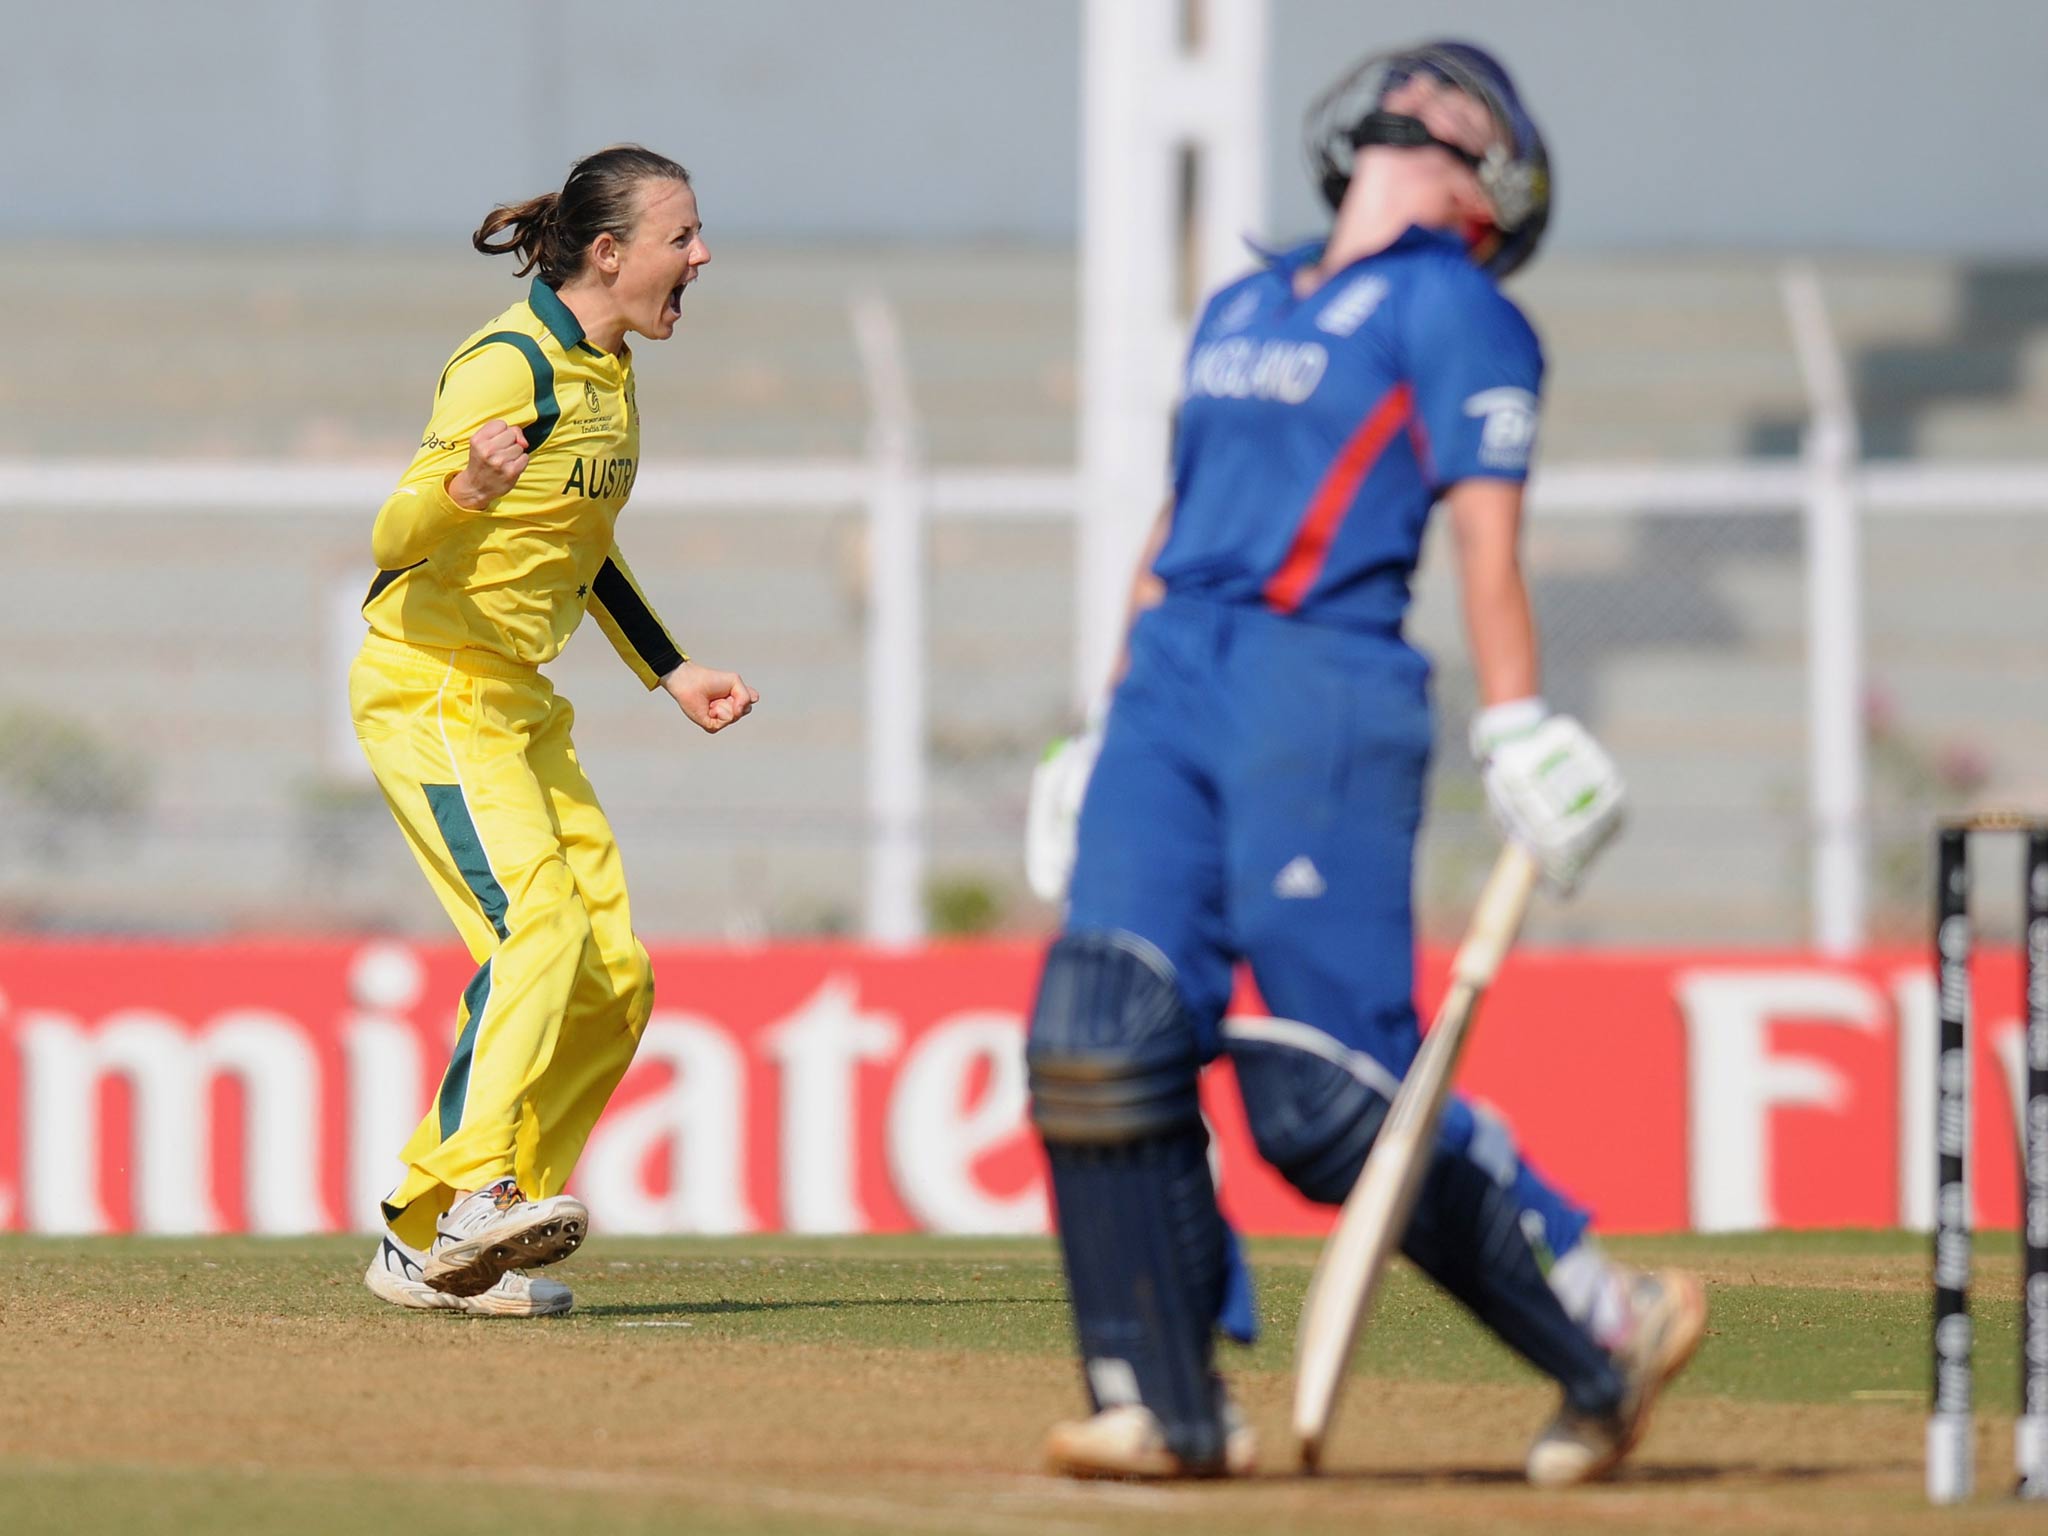 England lose to Australia by just two runs at the Women's Cricket